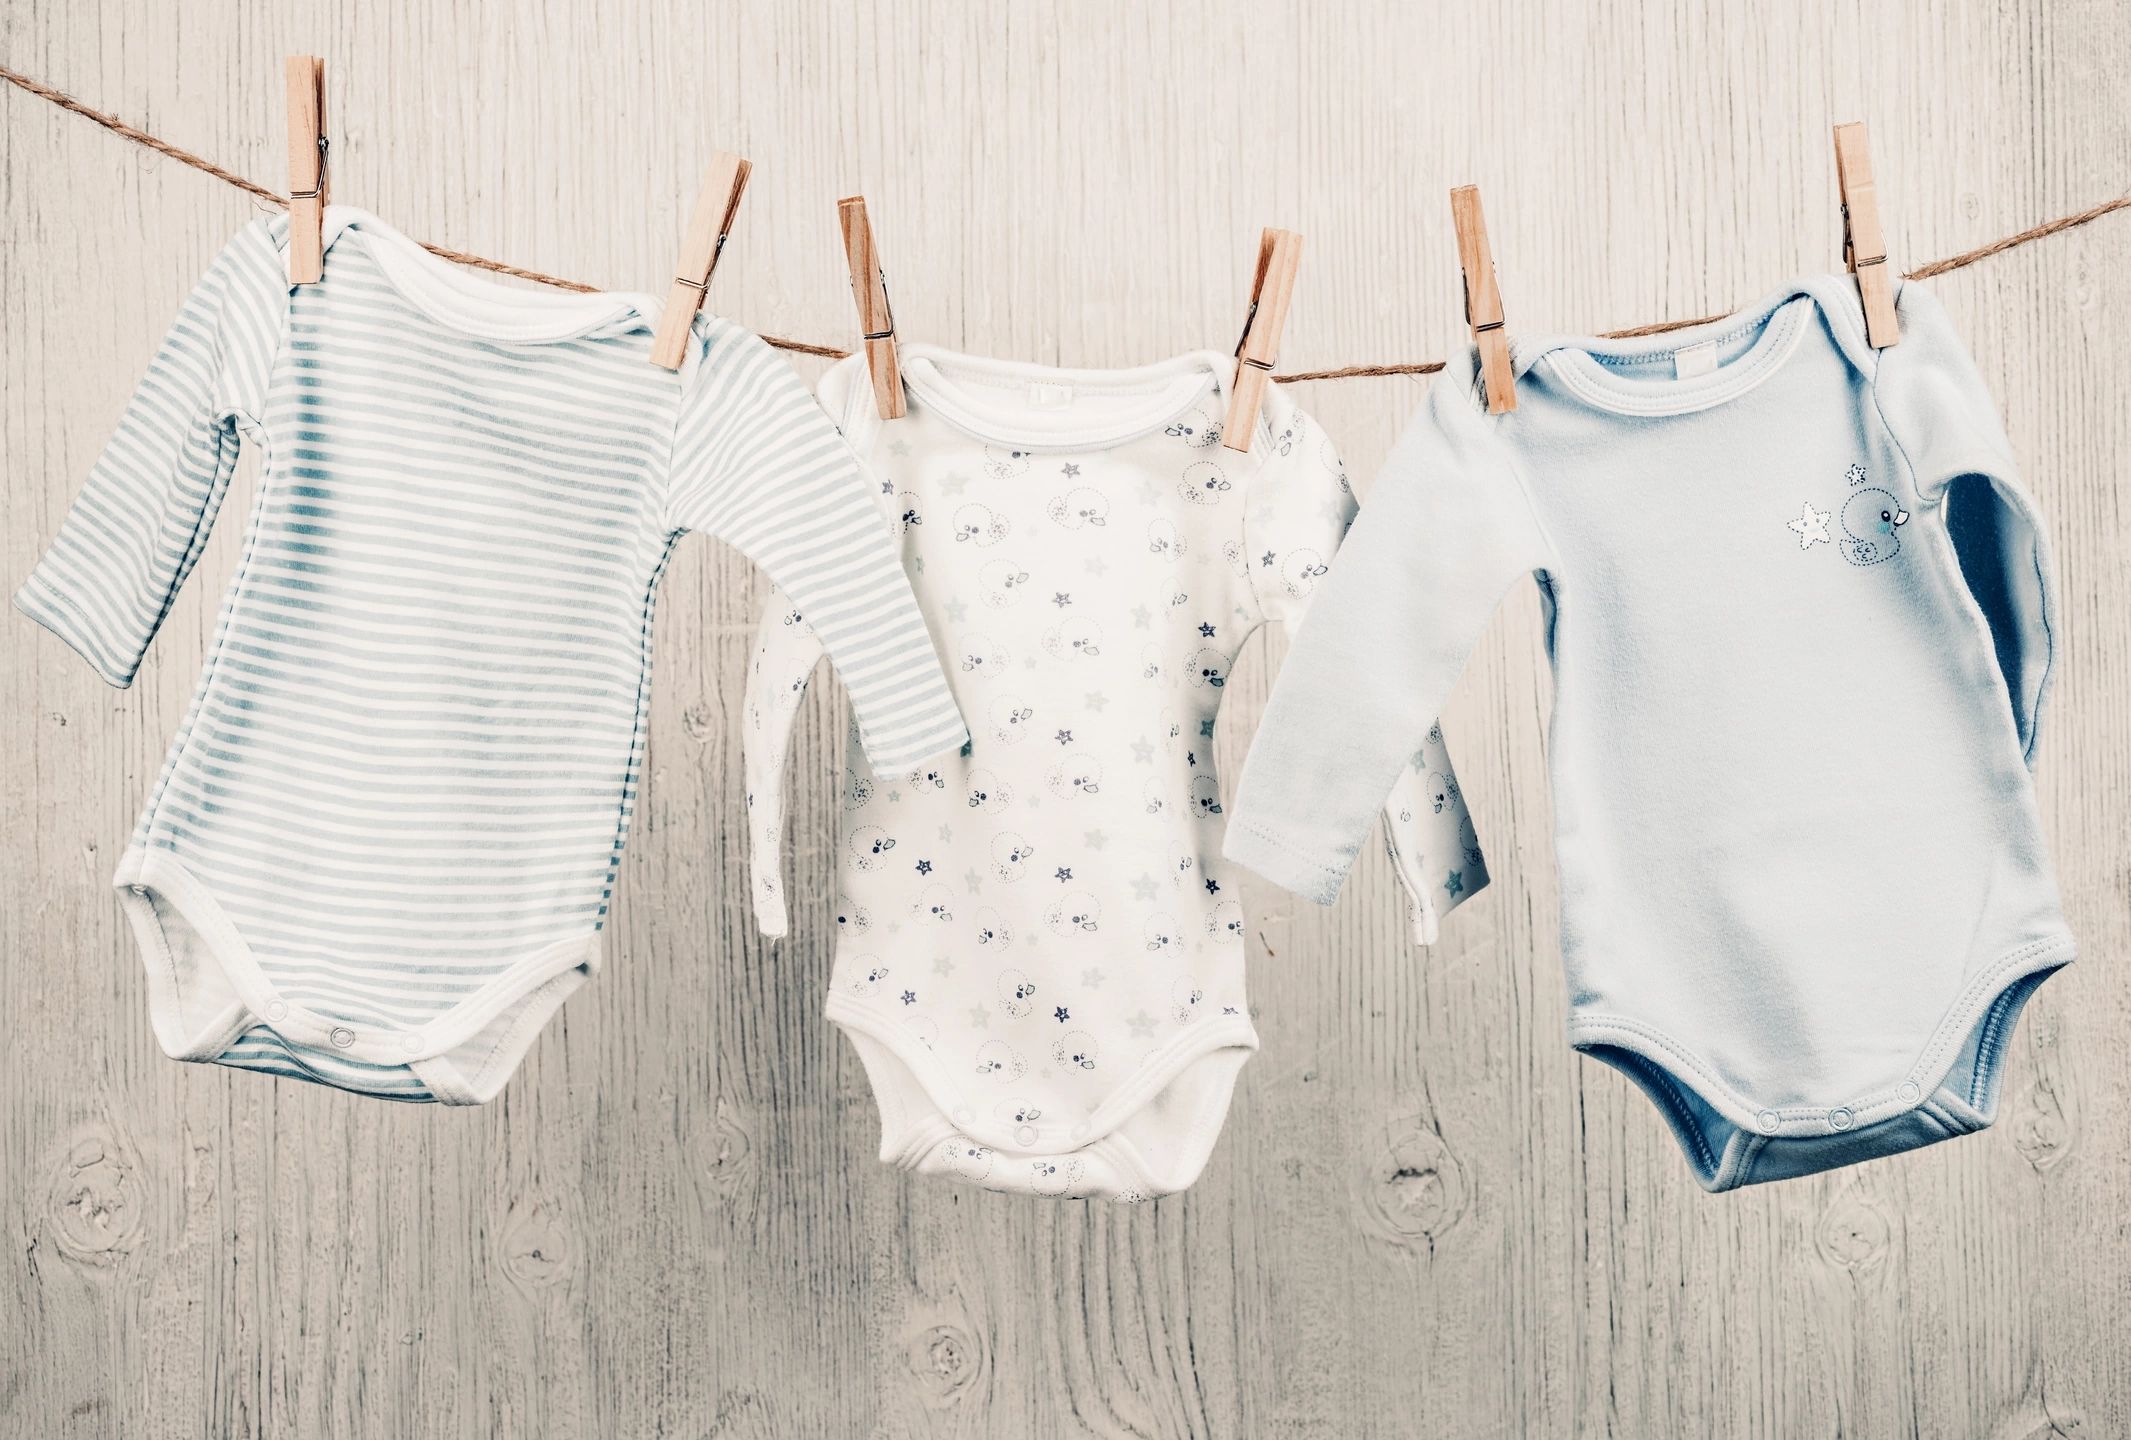 baby clothing hanging on a line